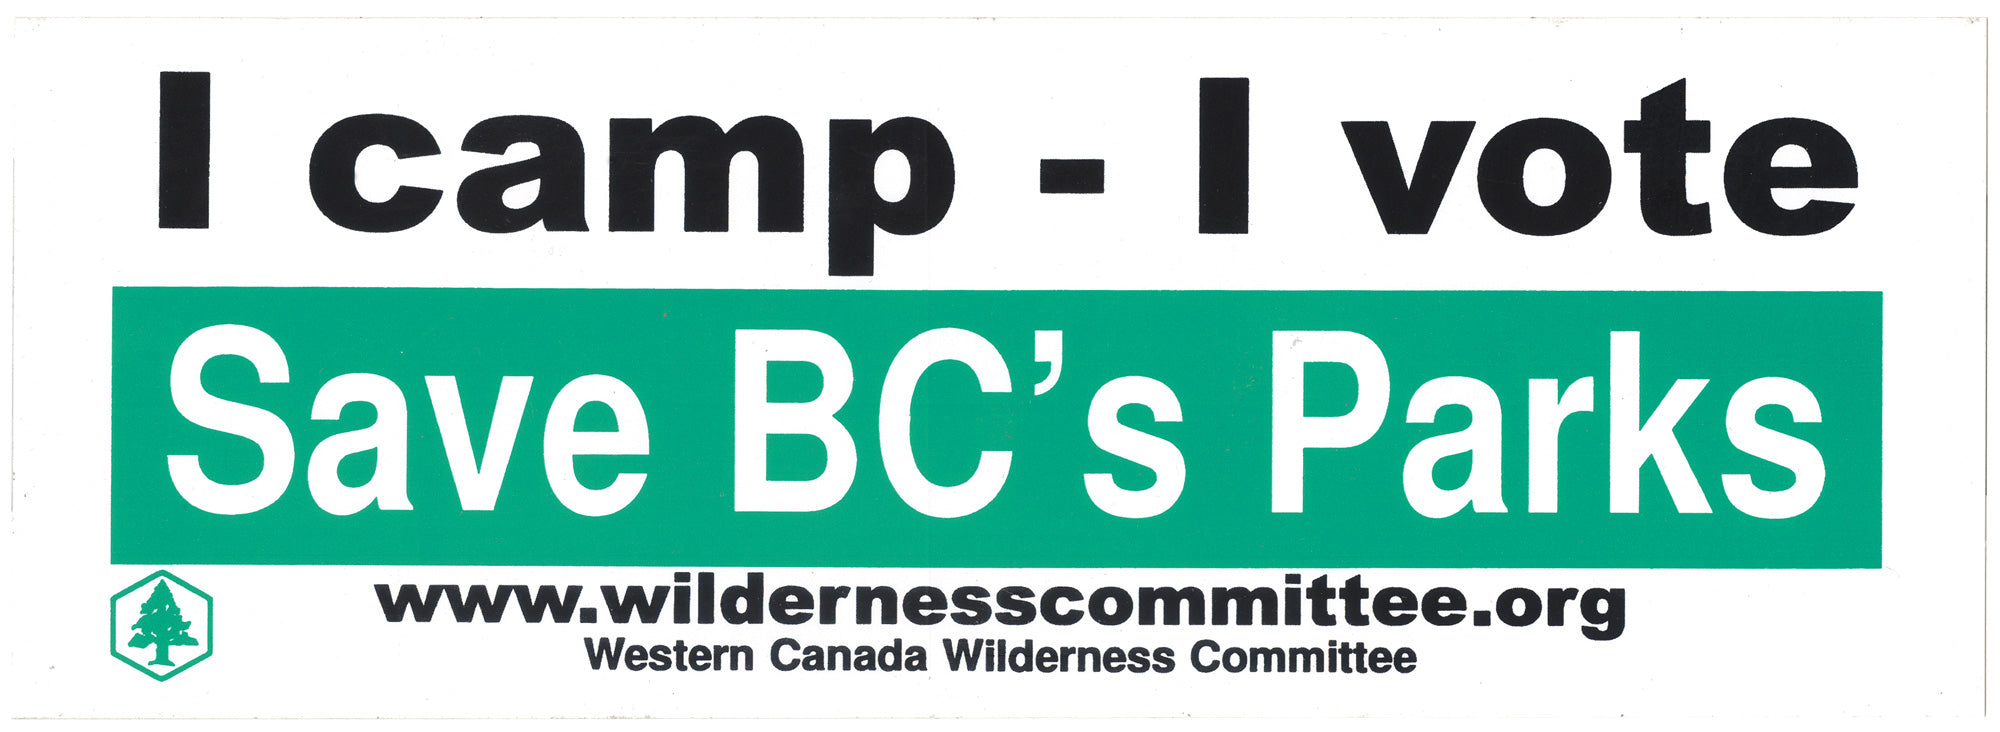 A sticker that says "I camp I vote. Save BC's parks" with logos of the Wilderness Committee on the bottom. End of image description.